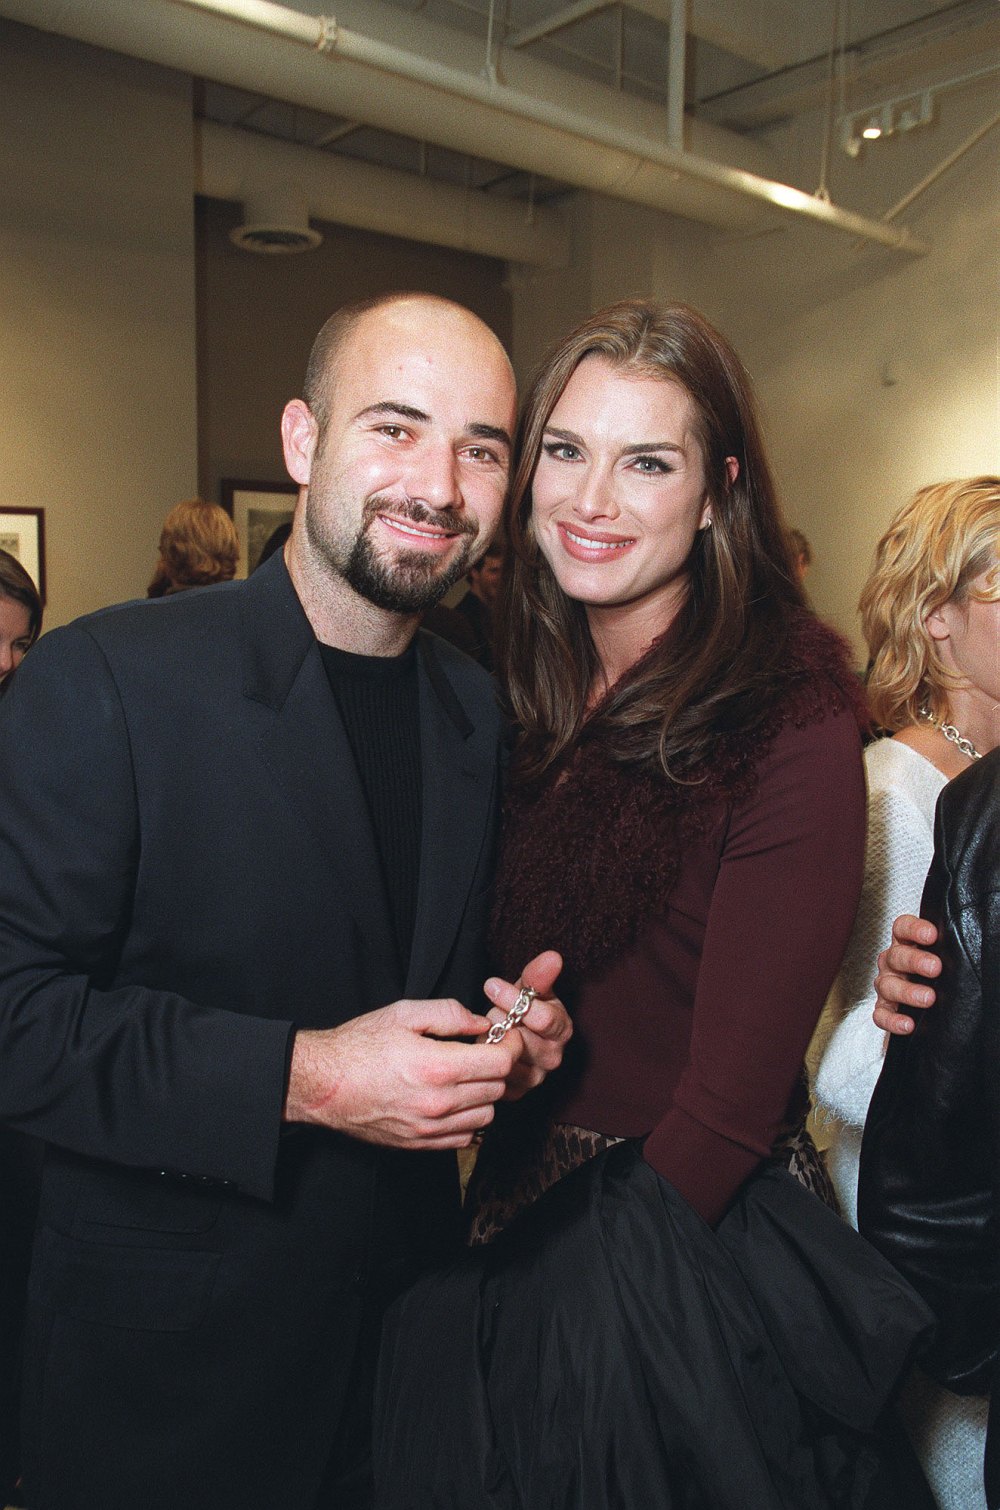 Brooke Shields Slams Ex-Husband Andre Agassi in Segment About Divorce on Today Show